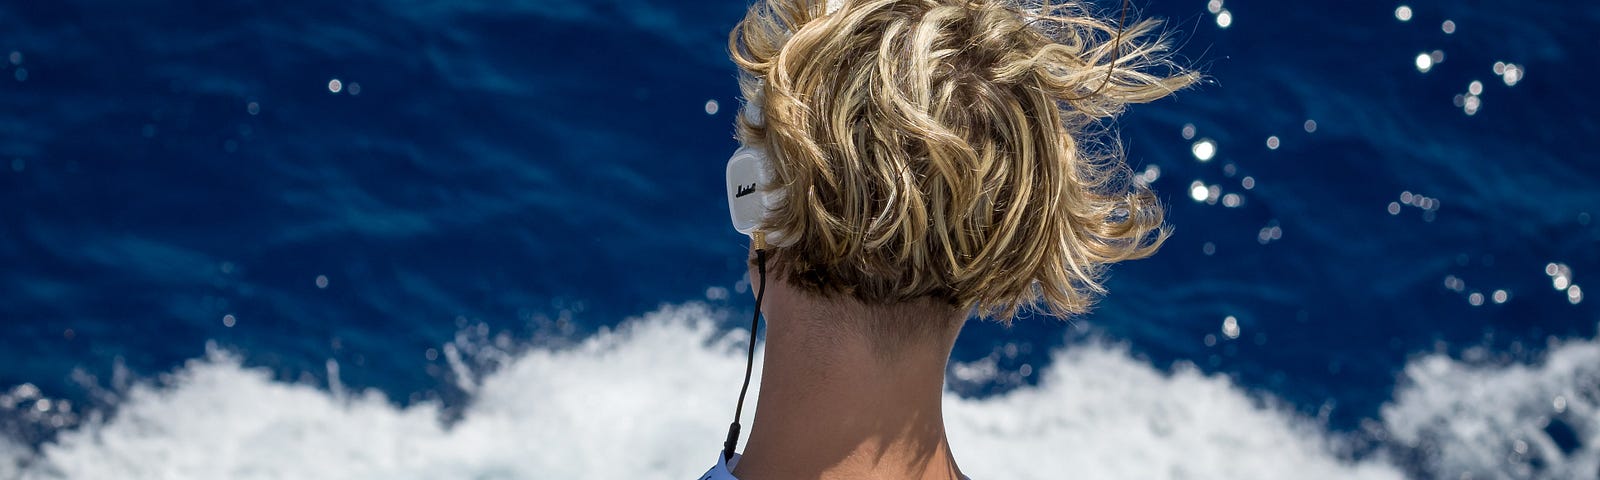 Man with headphones looking into the waves during a windy day